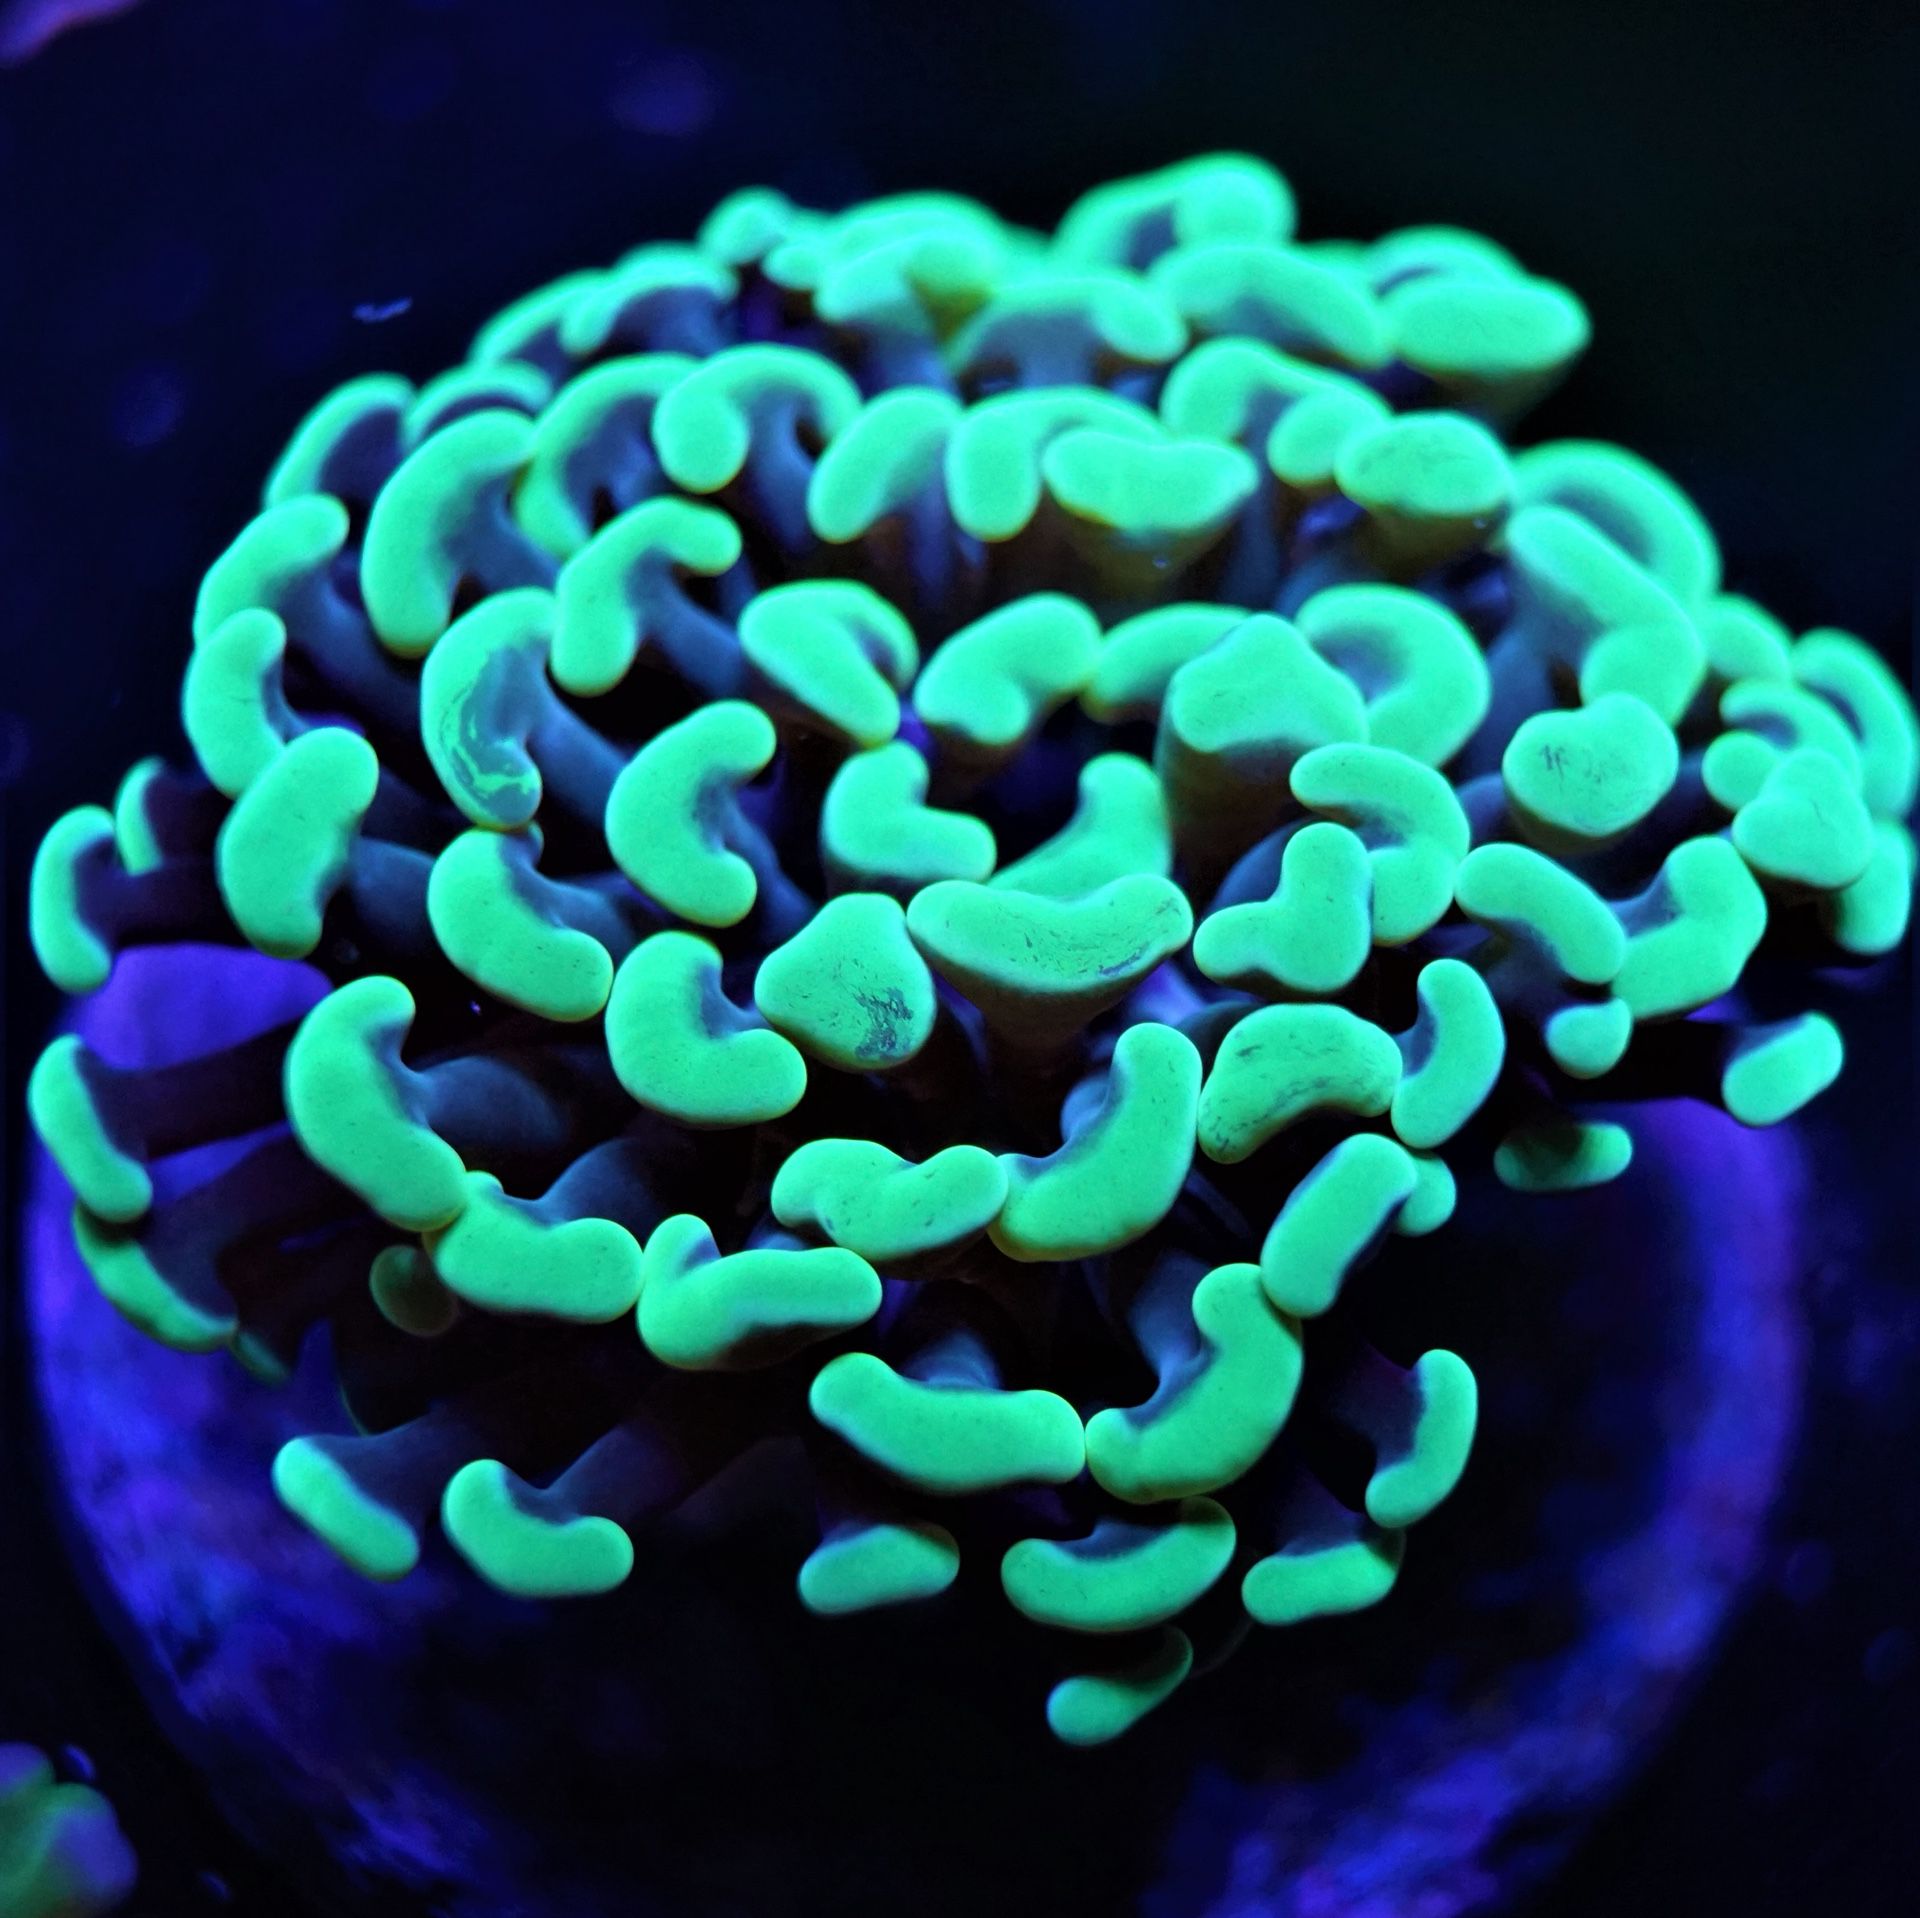 Coral for less! Best prices on coral in town